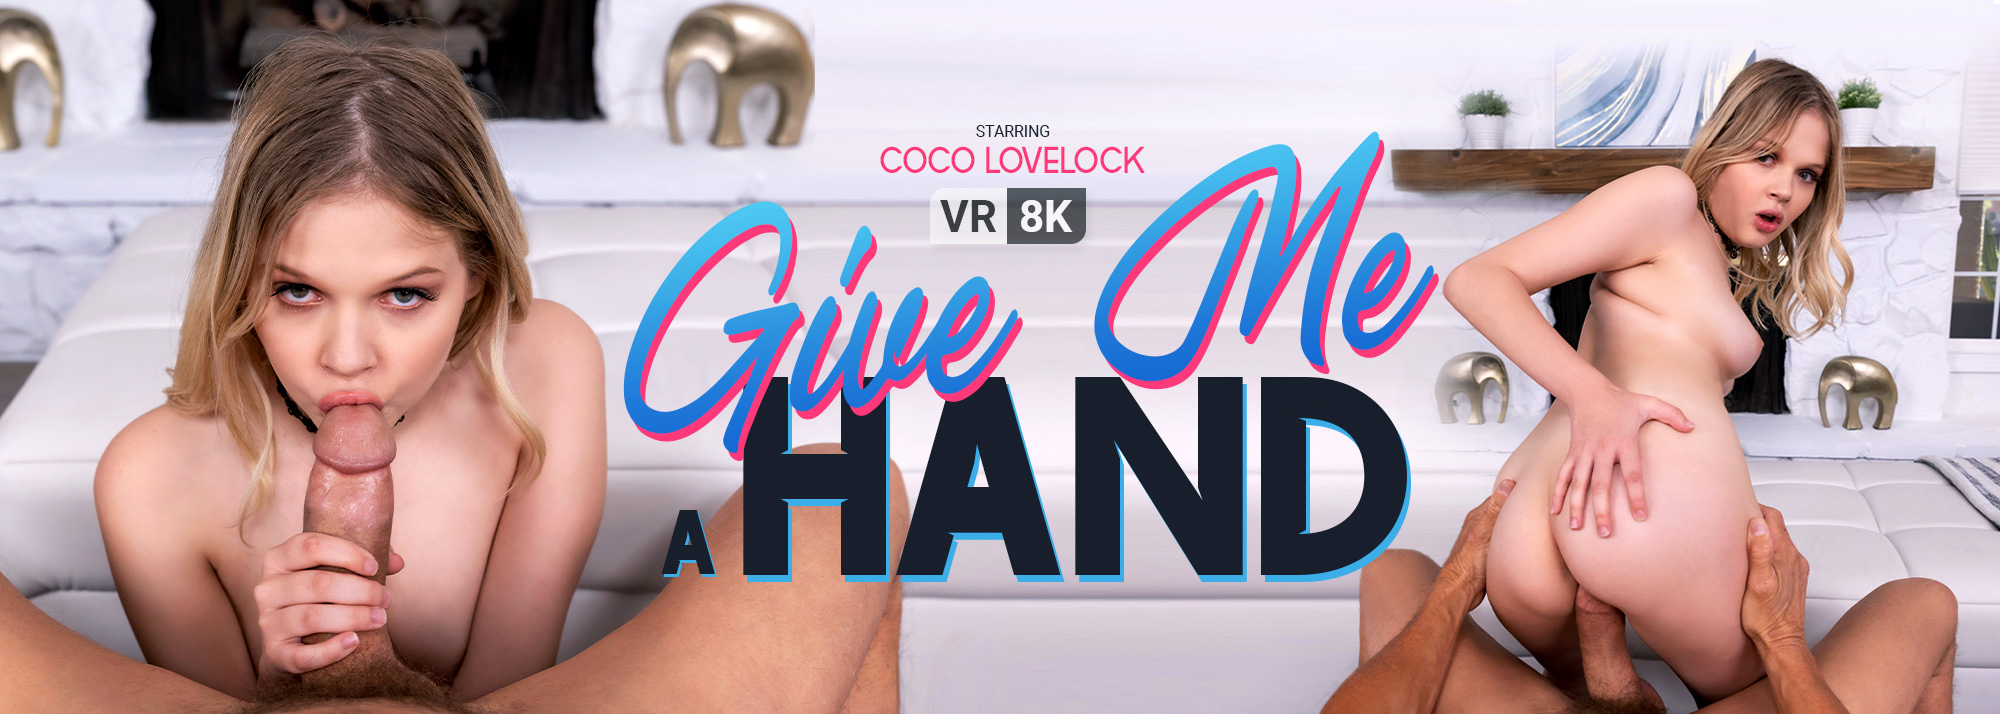 Give Me a Hand - VR Porn Video, Starring: Coco Lovelock